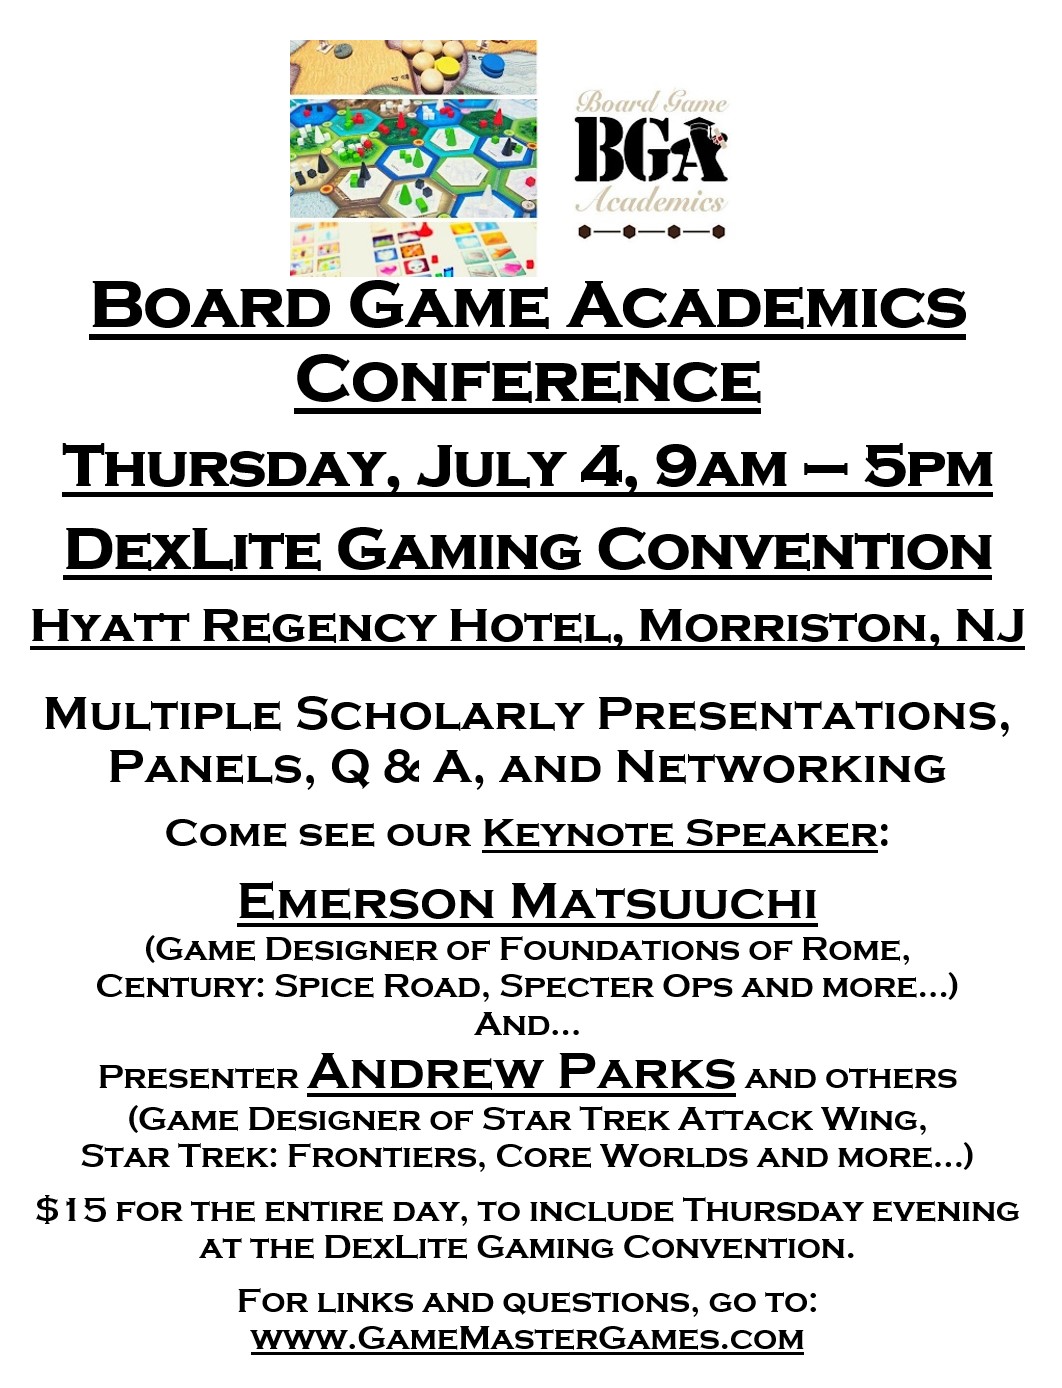 Come see Board Game Academics Conference!  Speakers, Presentations, Learn something new, Networking and more…